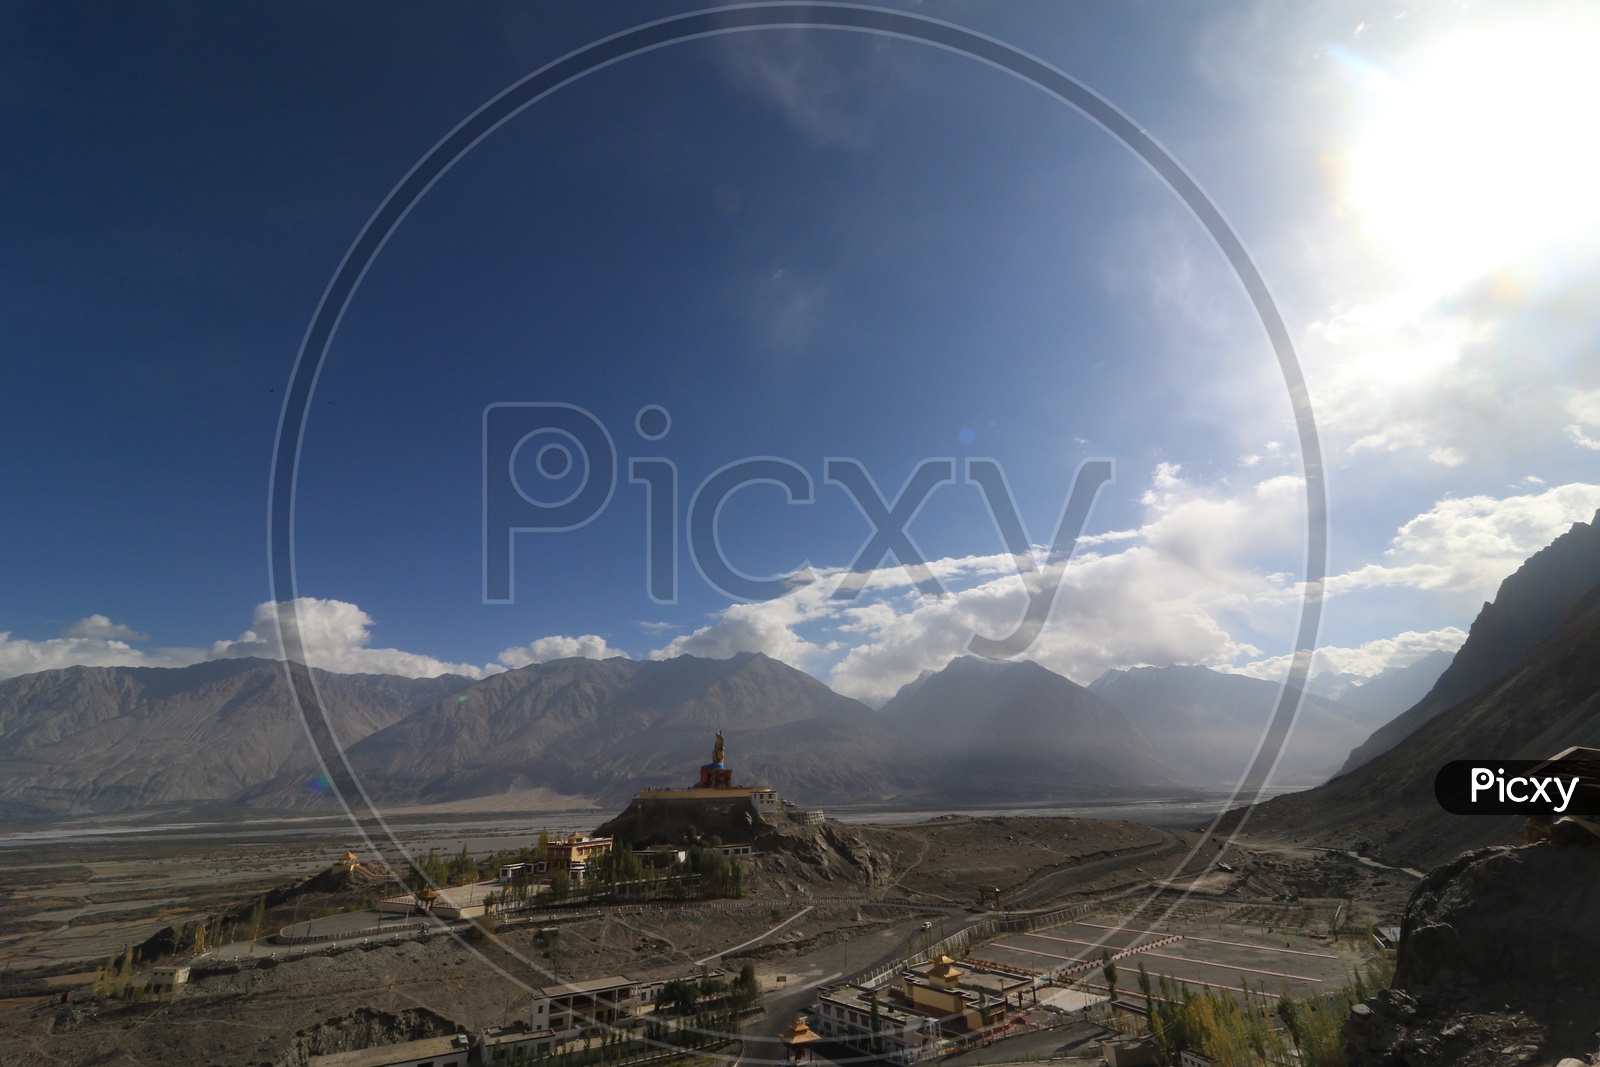 Buddha Statue with beautiful mountains in the background in leh